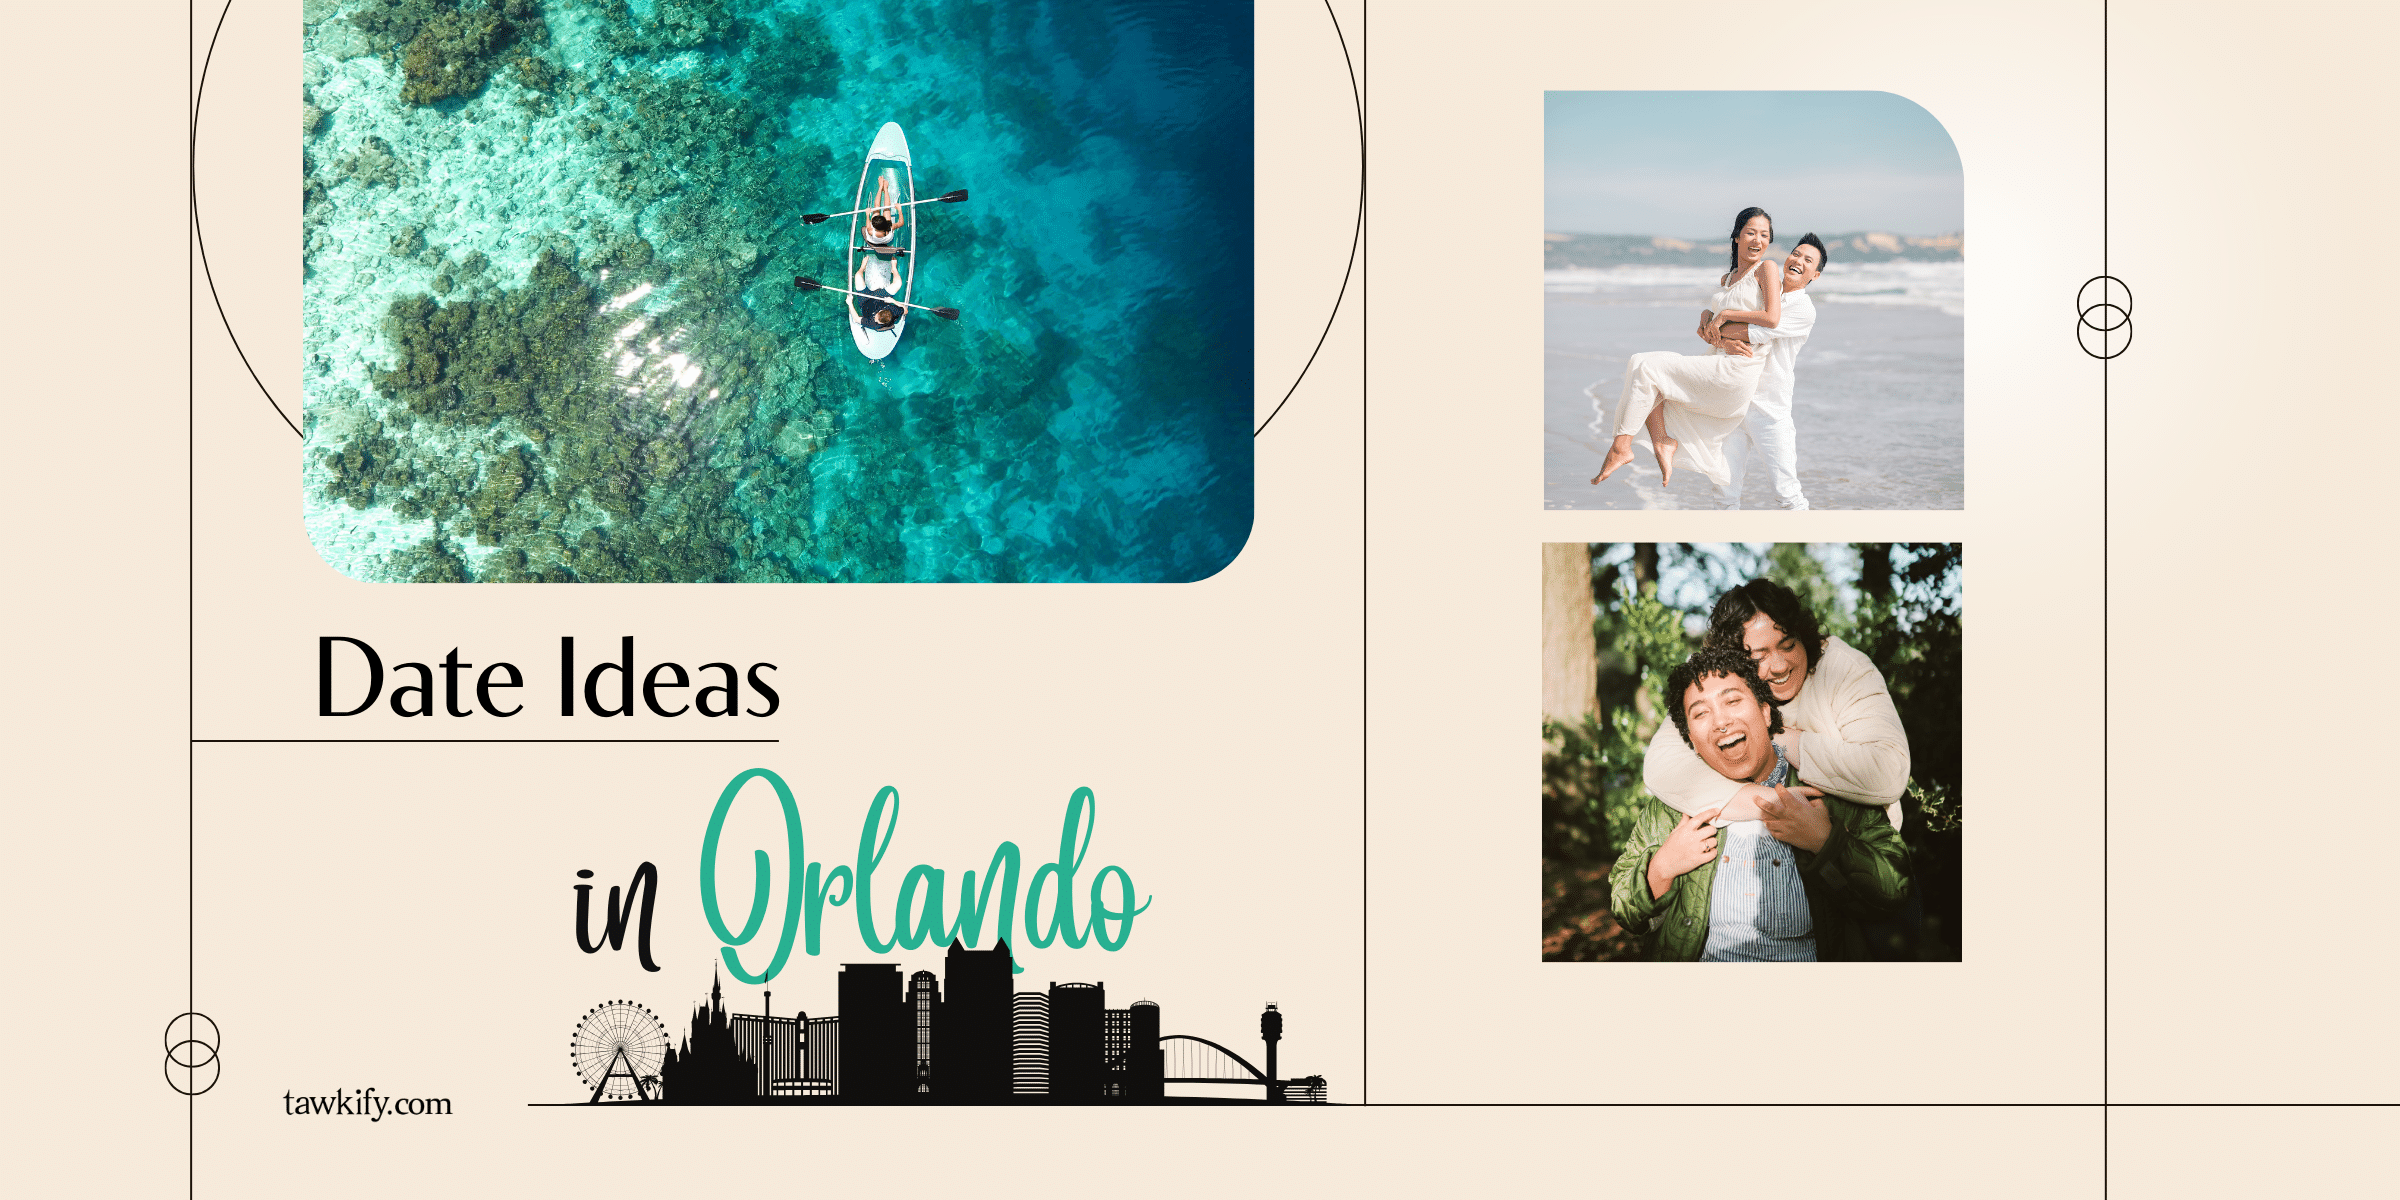 Wondering where to go on a first date or how to surprise your partner on your anniversary? Check out our list of the best Orlando date ideas for inspiration!